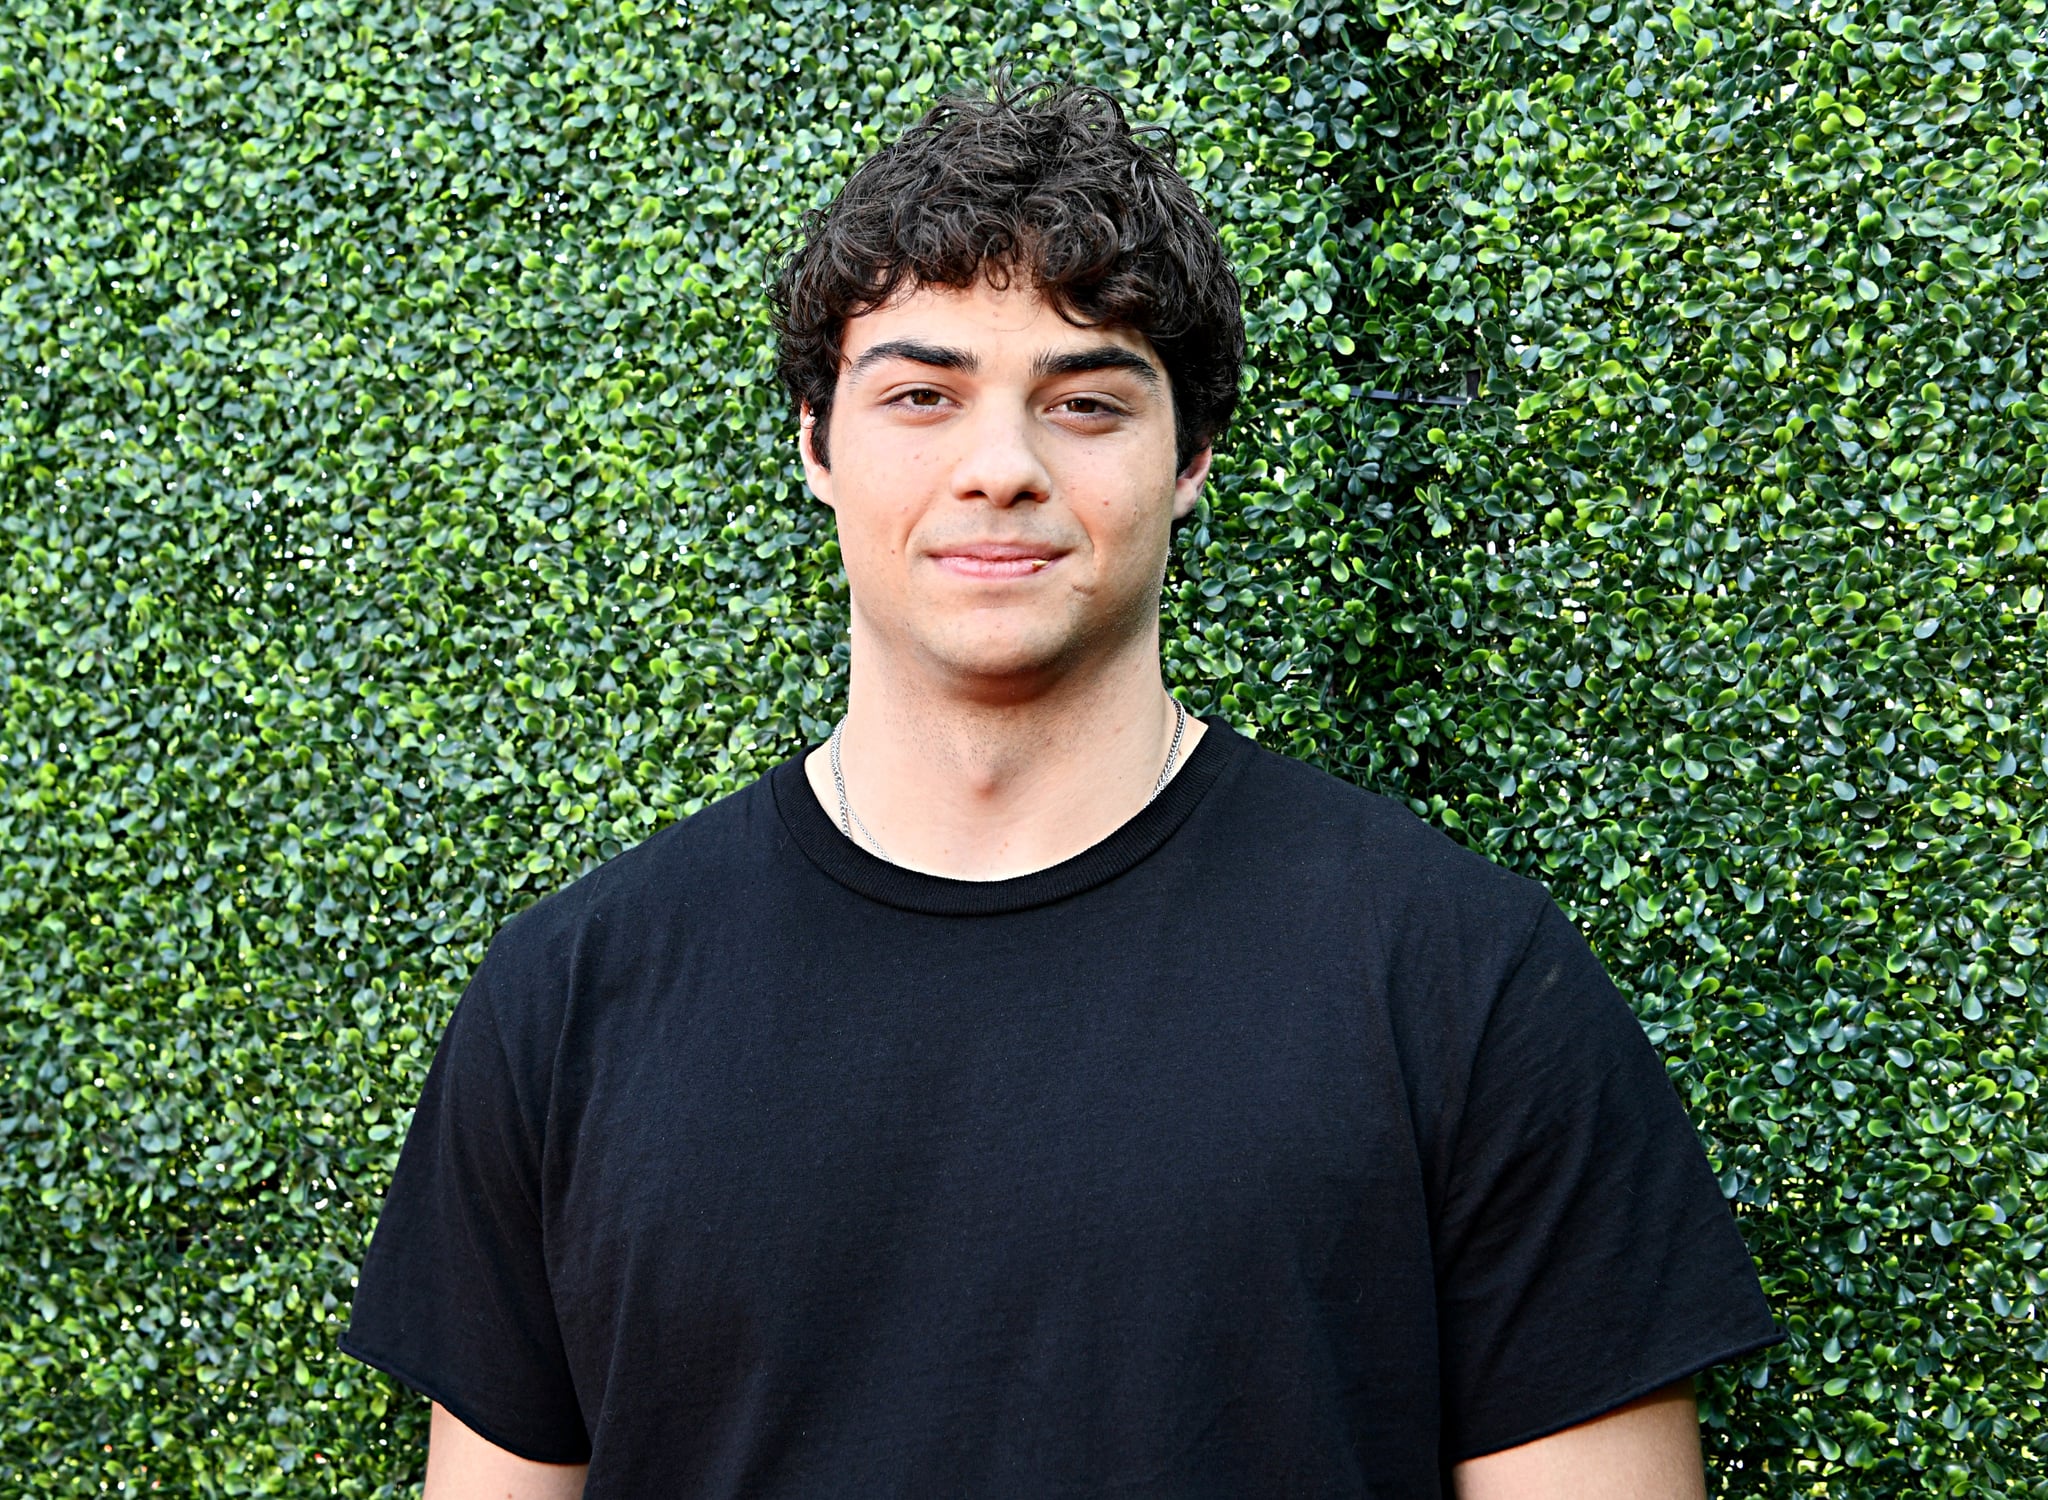 SANTA MONICA, CALIFORNIA - JUNE 15: Noah Centineo attends the 2019 MTV Movie and TV Awards at Barker Hangar on June 15, 2019 in Santa Monica, California. (Photo by Emma McIntyre/Getty Images for MTV)